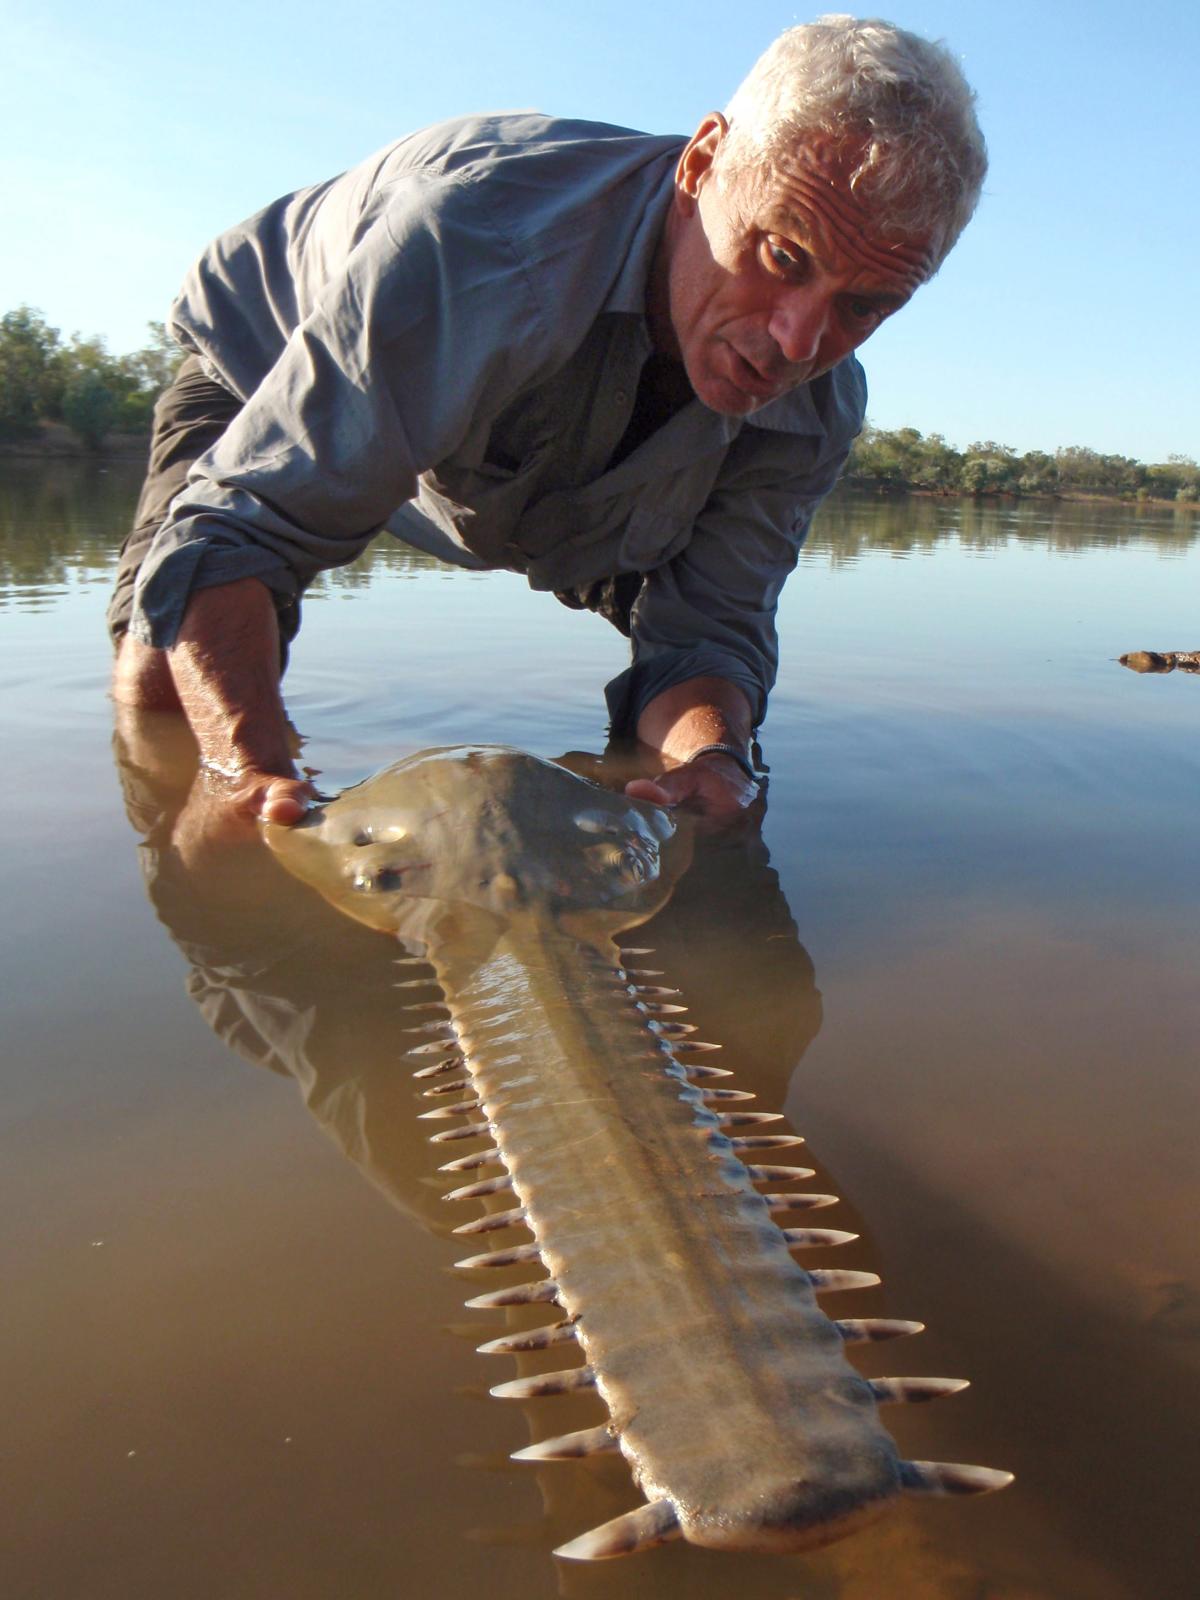 River monsters - Photos - River monsters | Jeremy wade, River ...